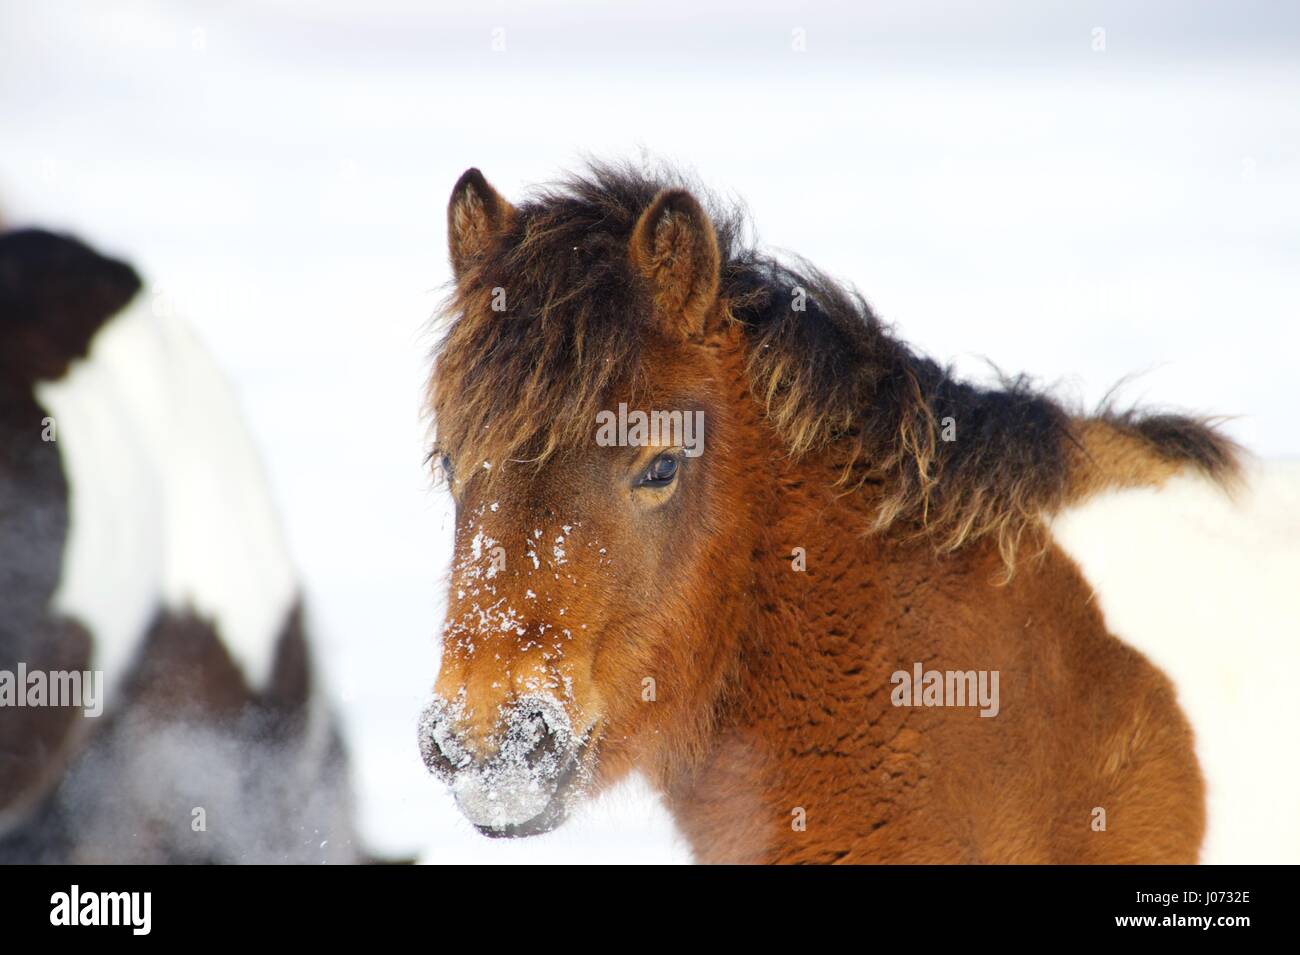 A red pony is standing in the snow Stock Photo